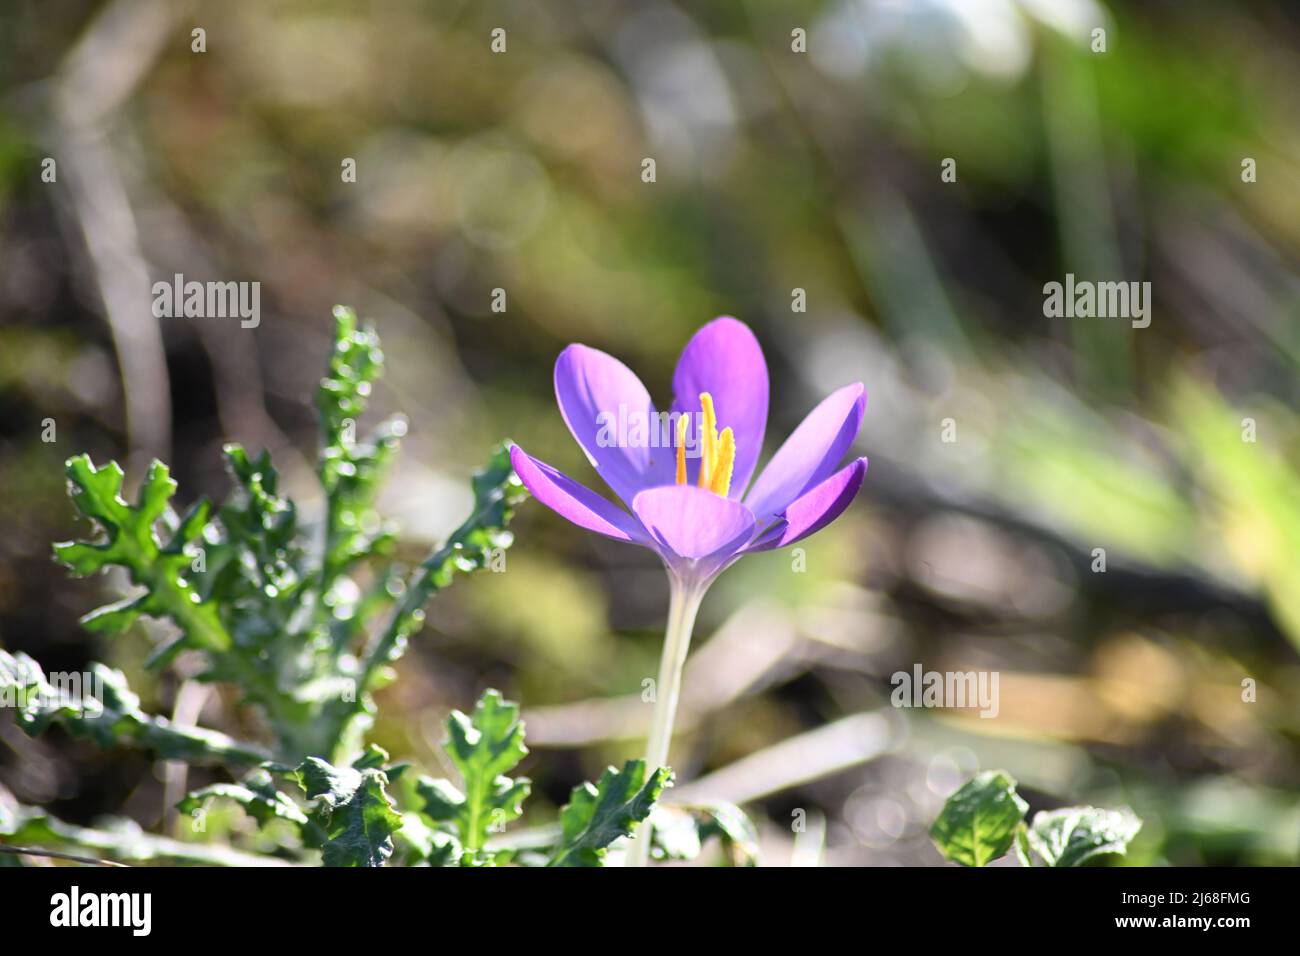 A beautiful fully bloomed Crocus tommasinianus, Whitewell purple, Early Crocus, elegant purple petals with the spring sunshine beaming through Stock Photo